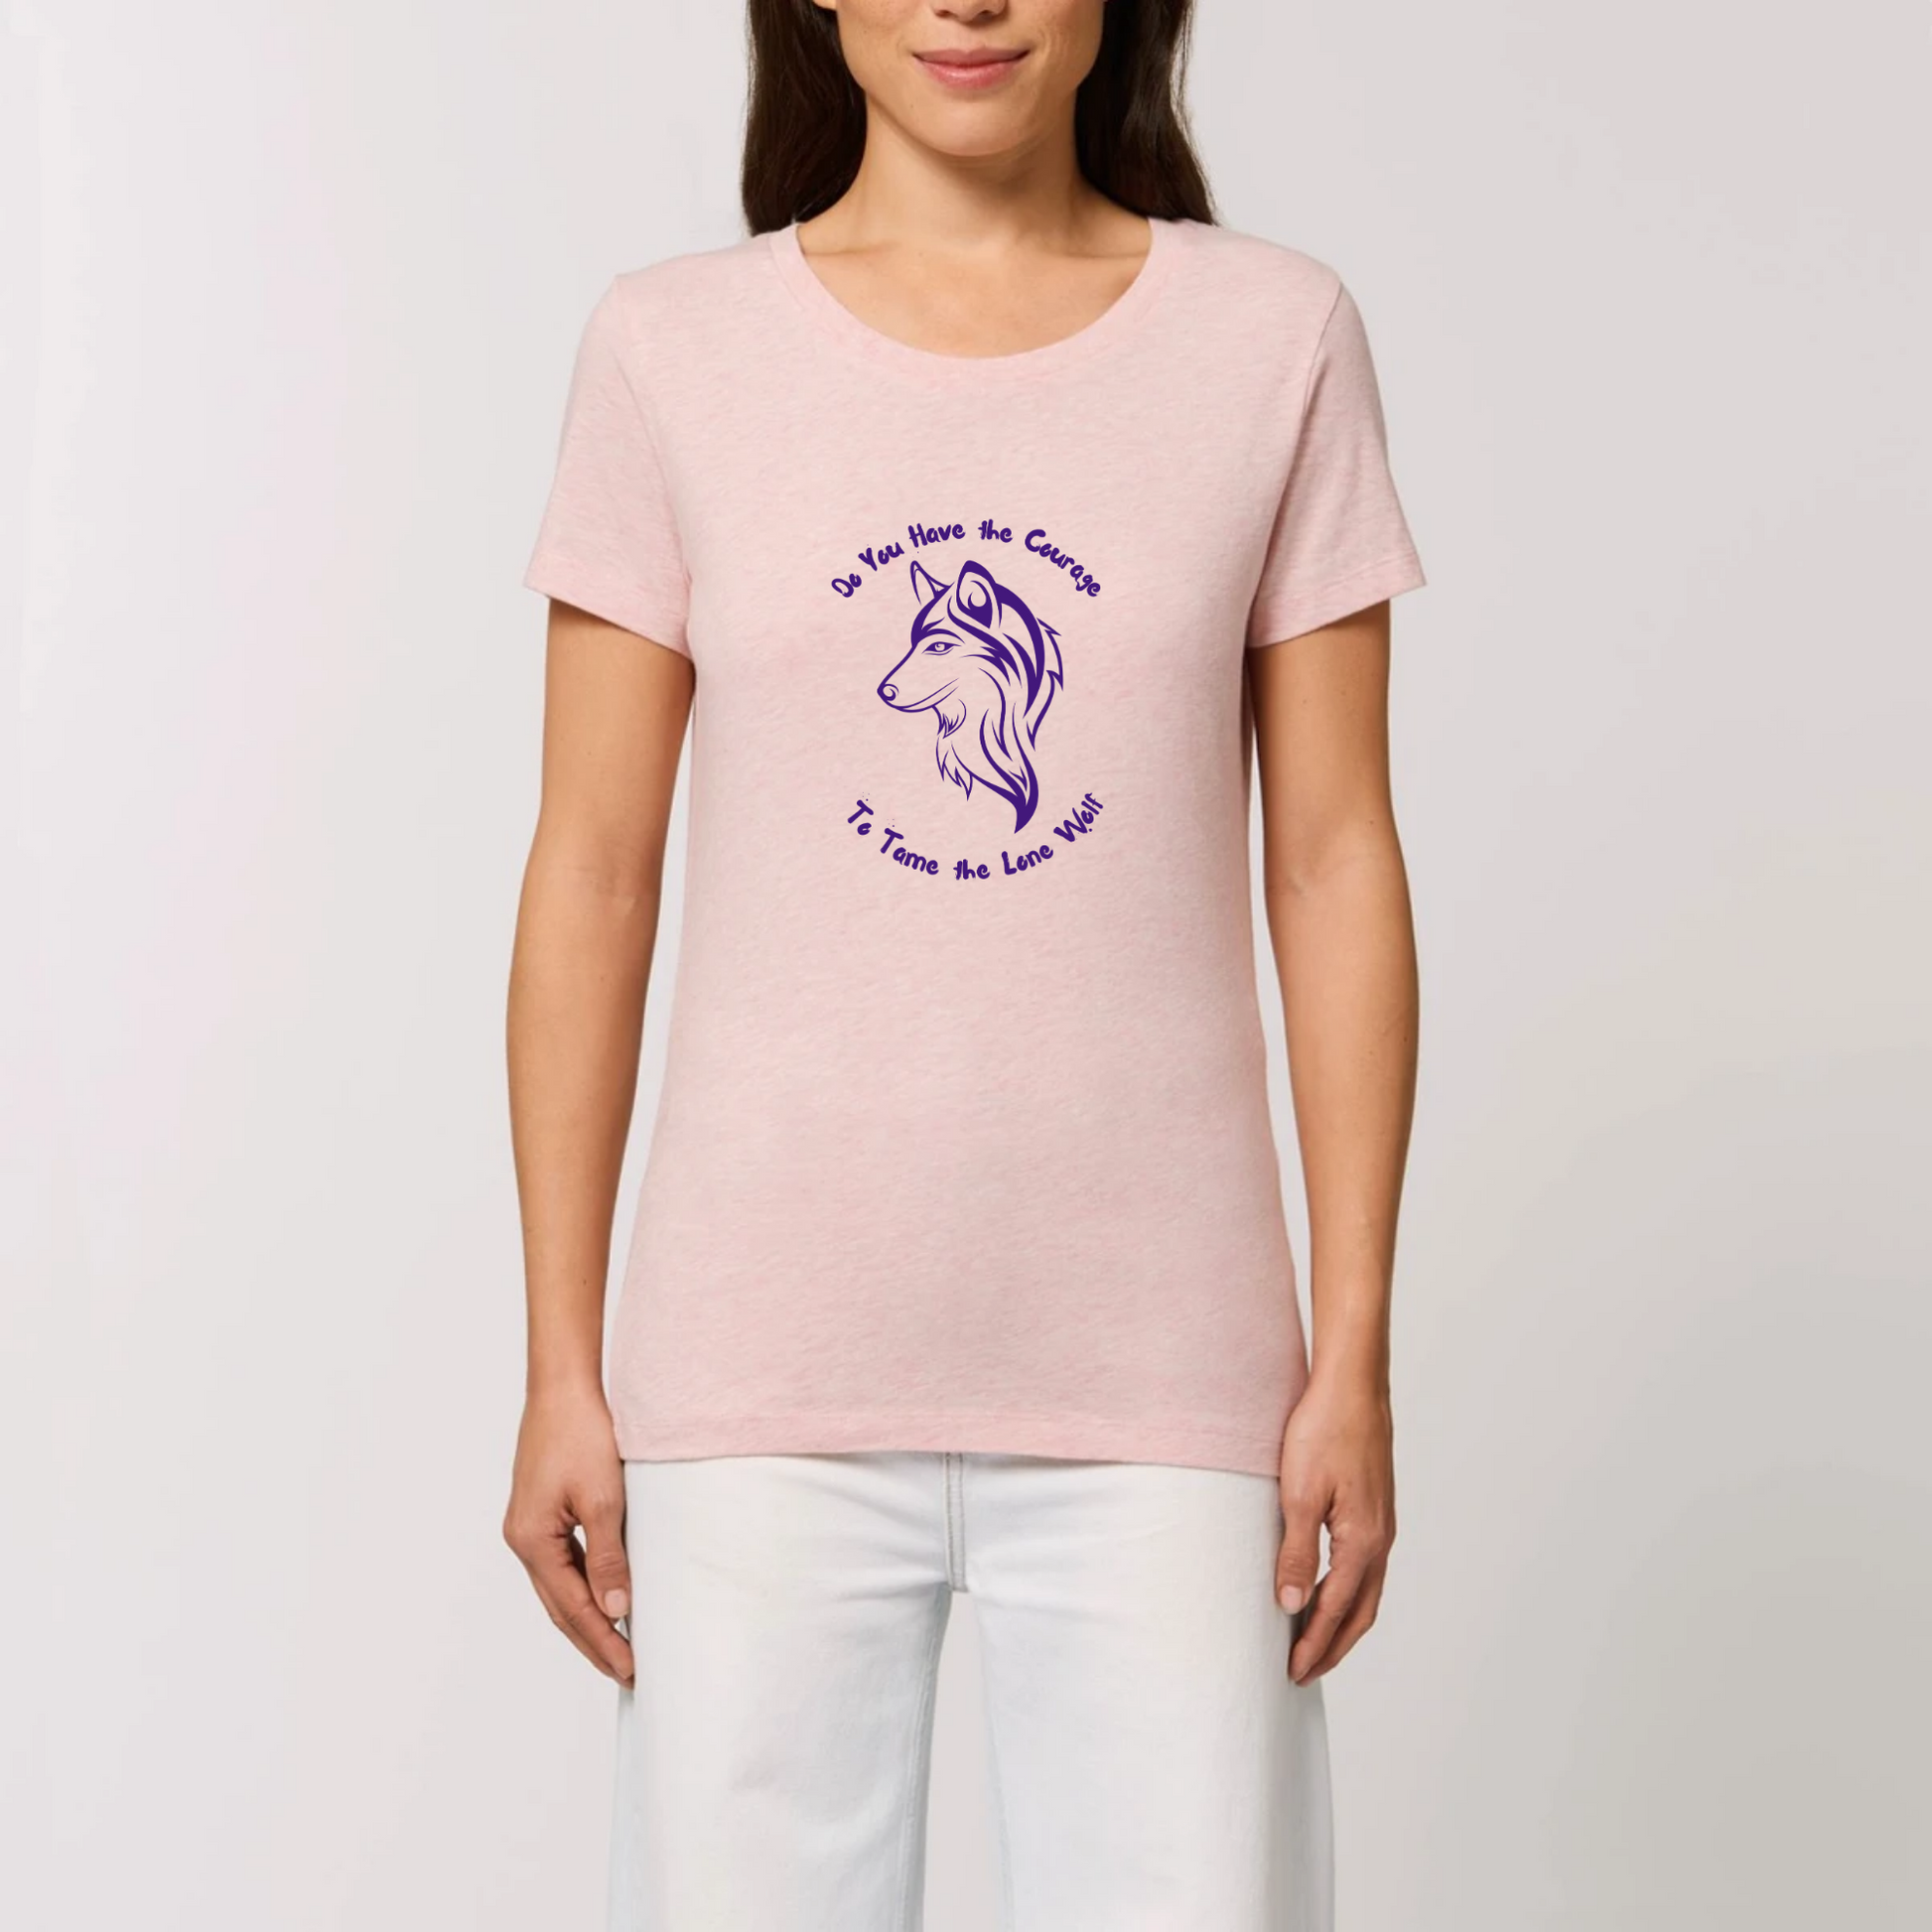 Graphic design t-shirt for women which features a feminine wolf head with wording above and below the wolf head saying Do You Have the Courage to Tame the Lone Wolf. The t-shirt is pink